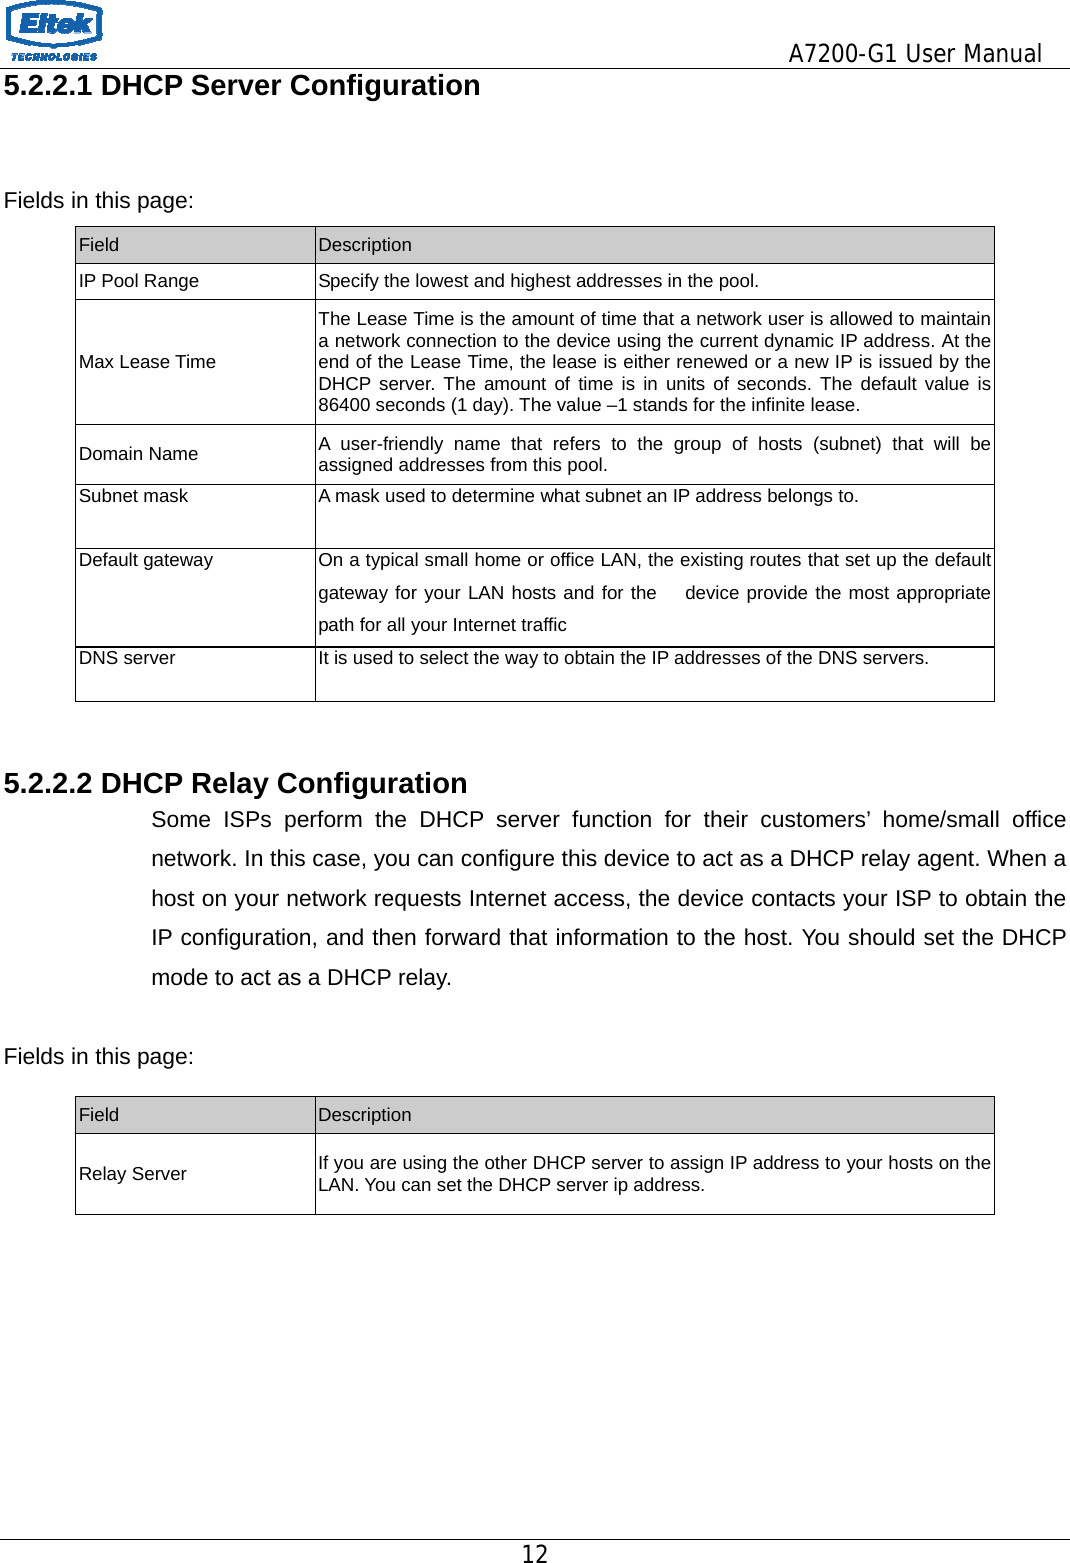                                         A7200-G1 User Manual 12  5.2.2.1 DHCP Server Configuration   Fields in this page: Field  Description IP Pool Range  Specify the lowest and highest addresses in the pool. Max Lease Time The Lease Time is the amount of time that a network user is allowed to maintain a network connection to the device using the current dynamic IP address. At the end of the Lease Time, the lease is either renewed or a new IP is issued by the DHCP server. The amount of time is in units of seconds. The default value is 86400 seconds (1 day). The value –1 stands for the infinite lease. Domain Name  A user-friendly name that refers to the group of hosts (subnet) that will be assigned addresses from this pool. Subnet mask  A mask used to determine what subnet an IP address belongs to. Default gateway  On a typical small home or office LAN, the existing routes that set up the default gateway for your LAN hosts and for the   device provide the most appropriate path for all your Internet traffic DNS server  It is used to select the way to obtain the IP addresses of the DNS servers.  5.2.2.2 DHCP Relay Configuration Some ISPs perform the DHCP server function for their customers’ home/small office network. In this case, you can configure this device to act as a DHCP relay agent. When a host on your network requests Internet access, the device contacts your ISP to obtain the IP configuration, and then forward that information to the host. You should set the DHCP mode to act as a DHCP relay.  Fields in this page:            Field  Description Relay Server  If you are using the other DHCP server to assign IP address to your hosts on the LAN. You can set the DHCP server ip address. 